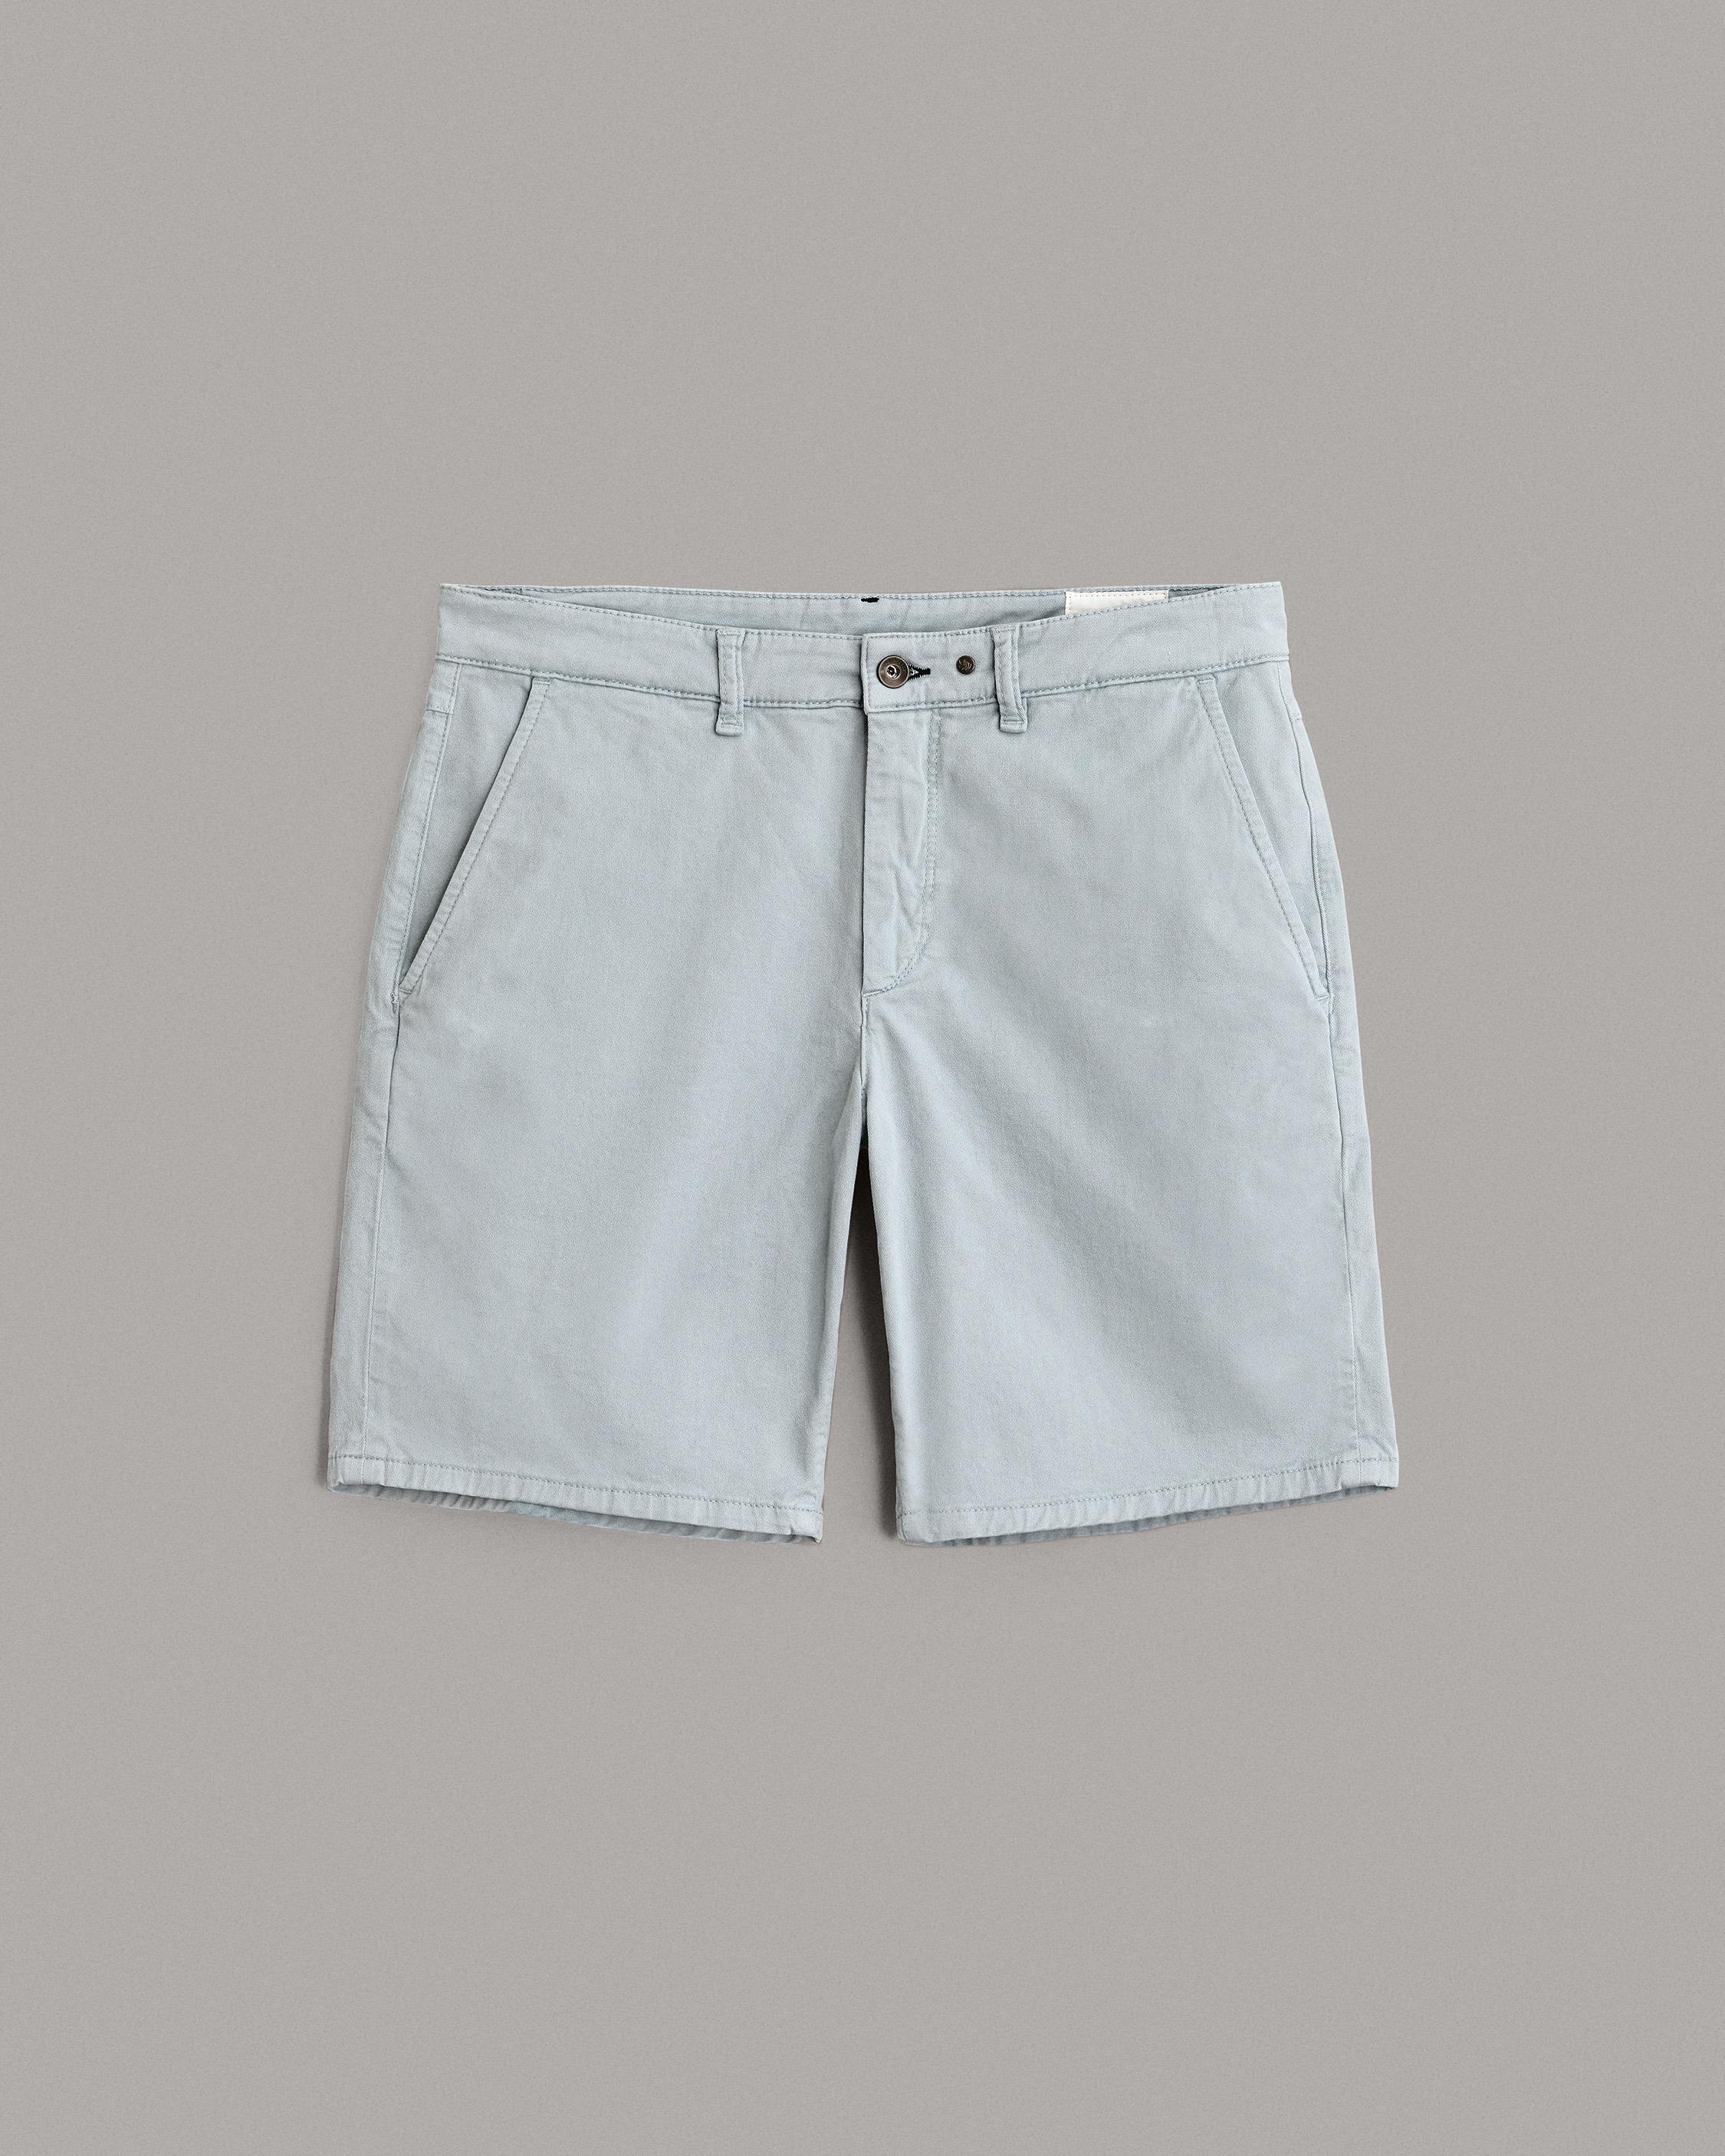 Perry Stretch Twill Cotton Short
Slim Fit Short - 1